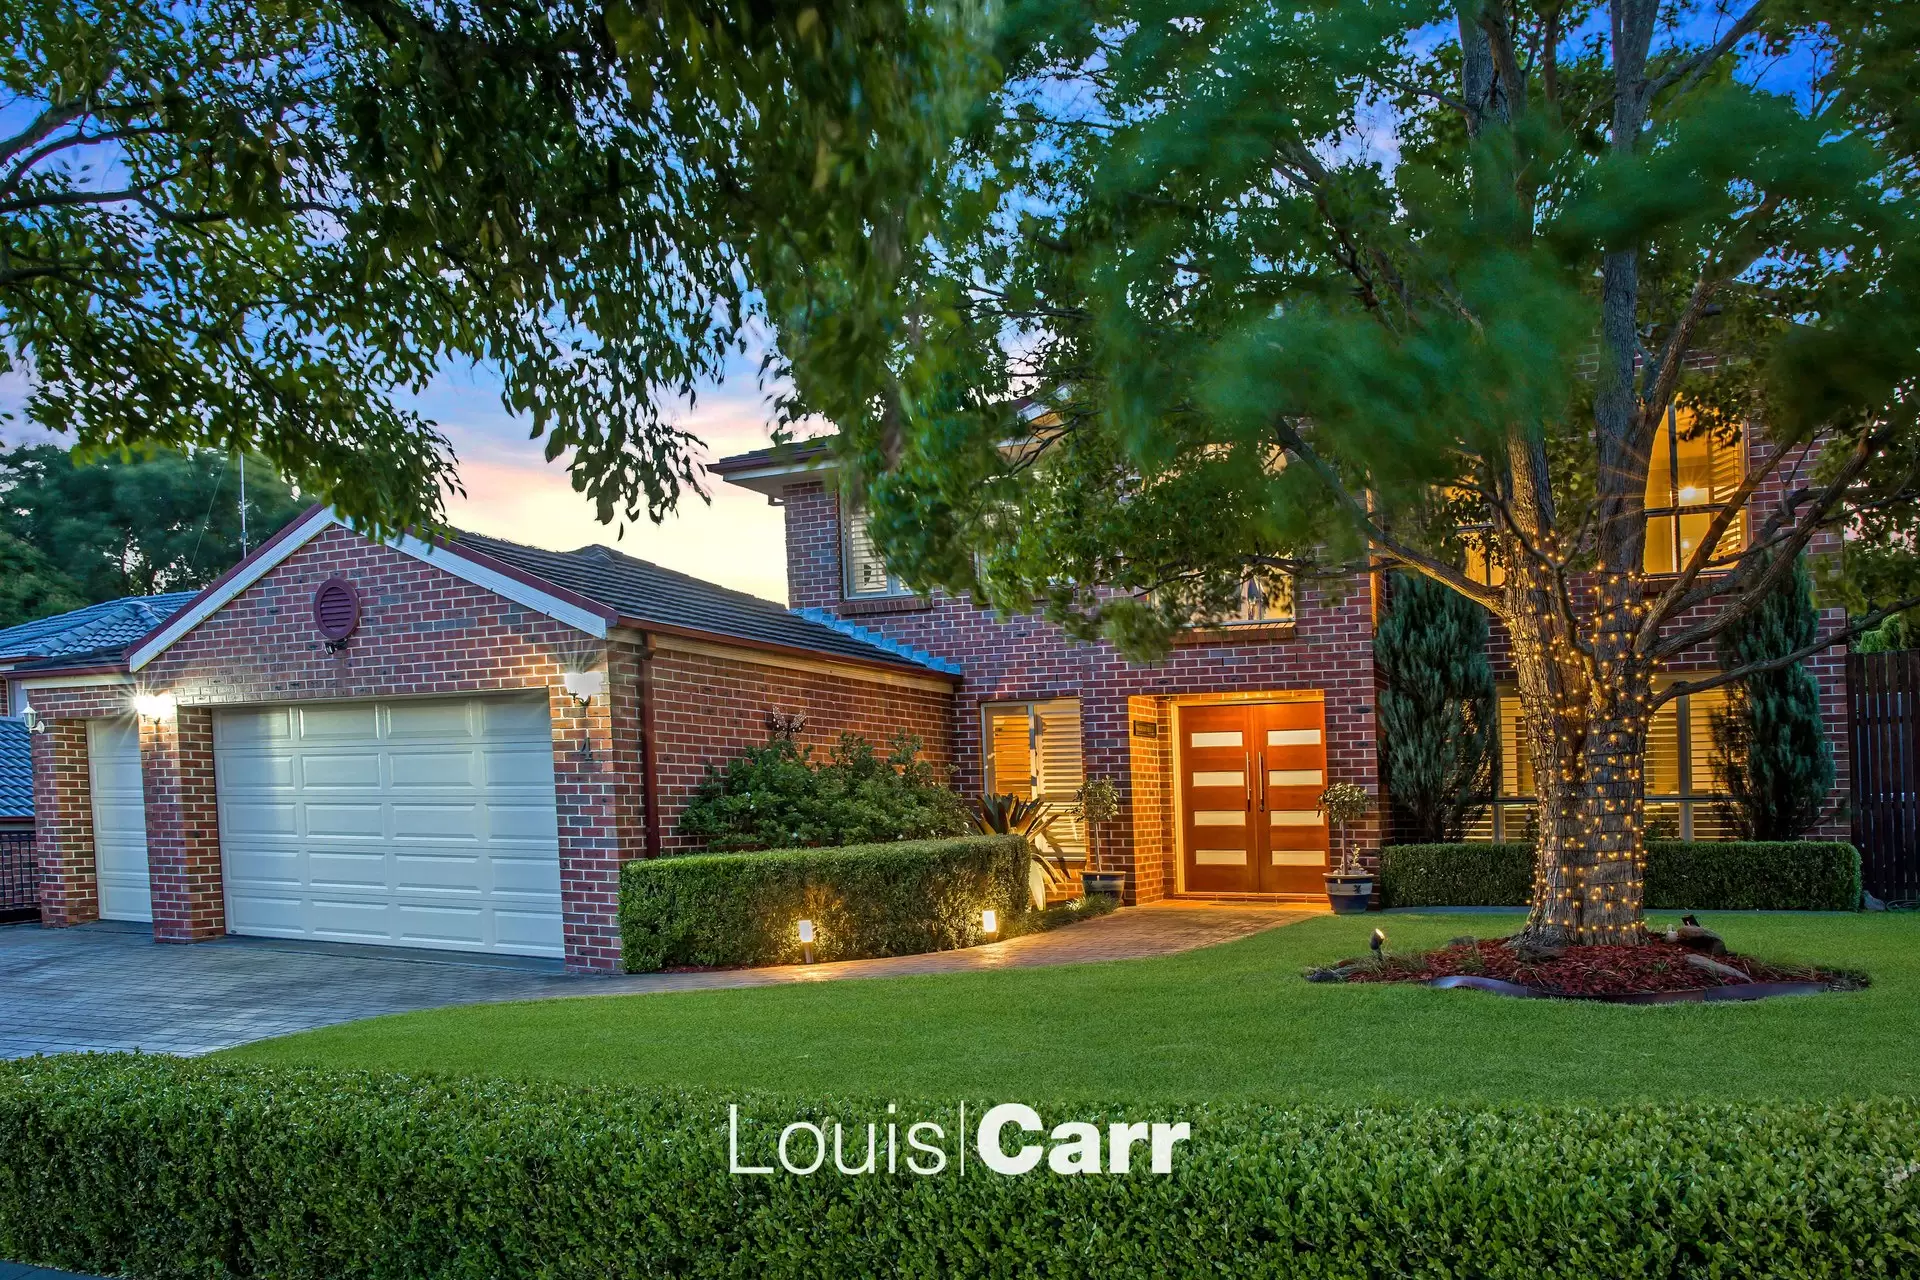 Photo #19: 4 Rooke Court, Kellyville - Sold by Louis Carr Real Estate